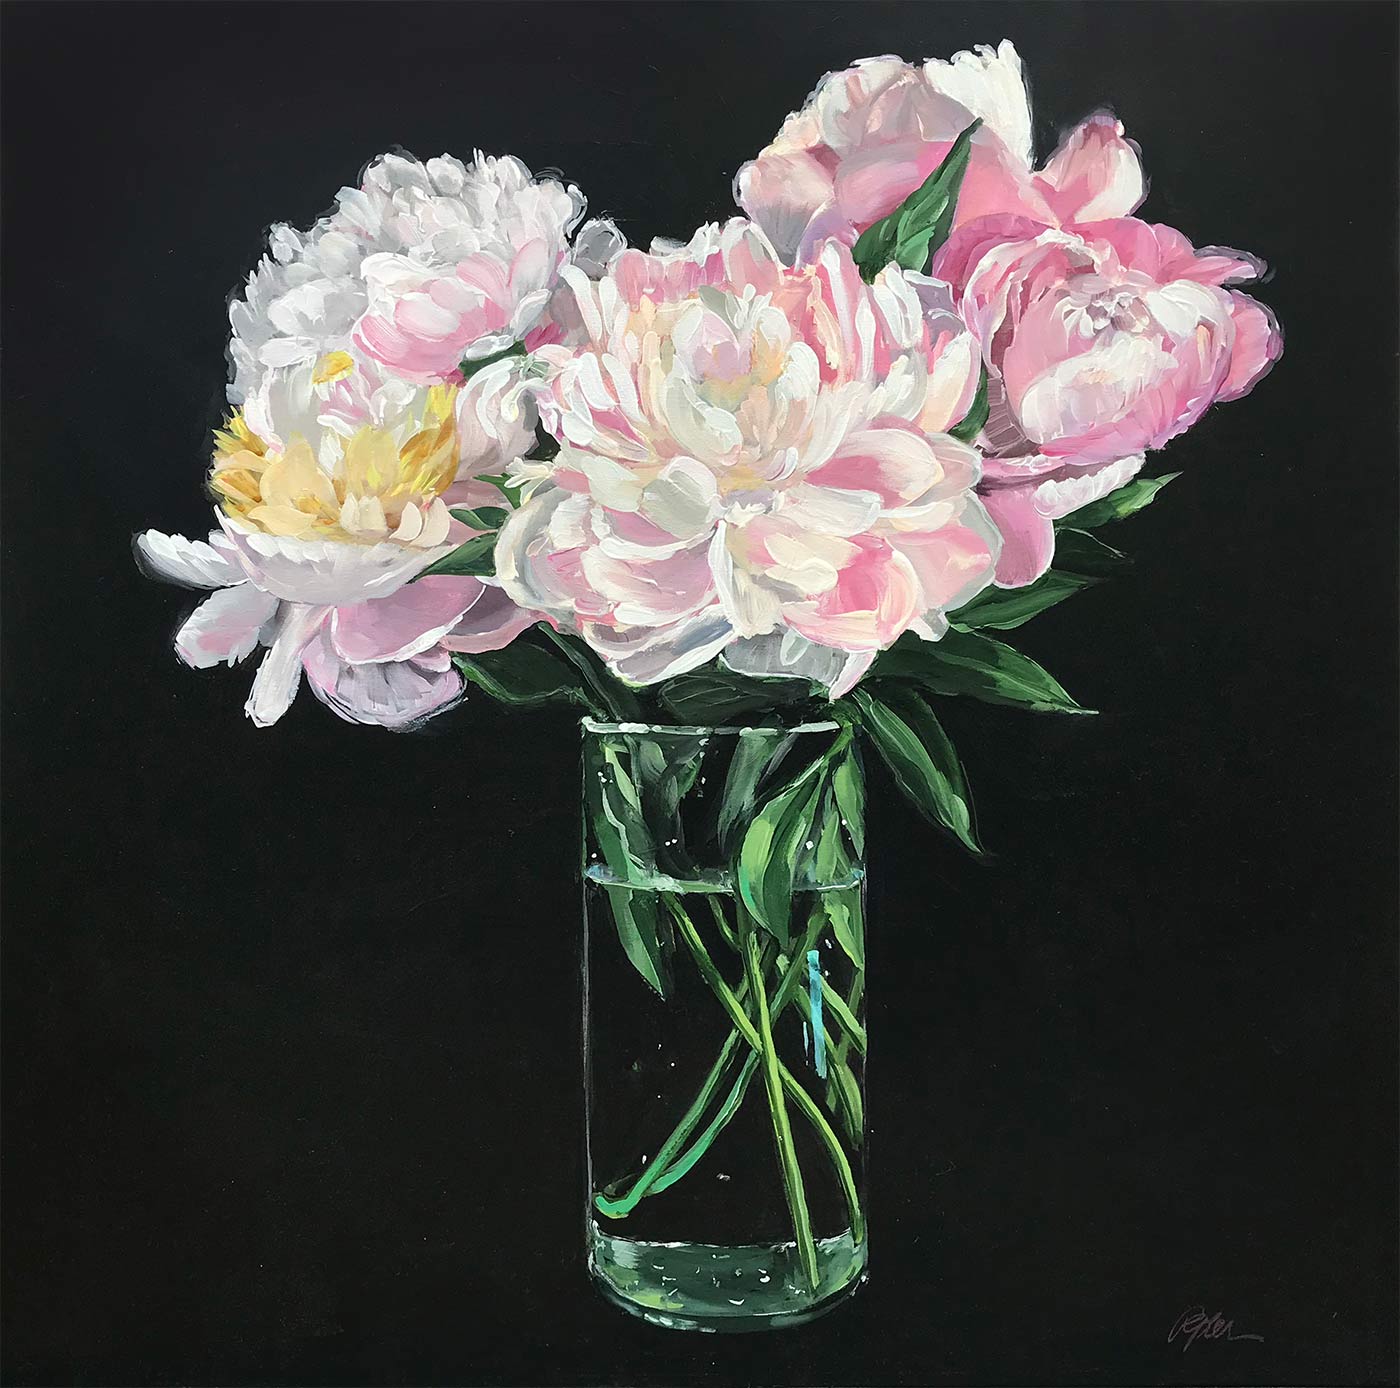 Peony Blossoms in a Glass Vase